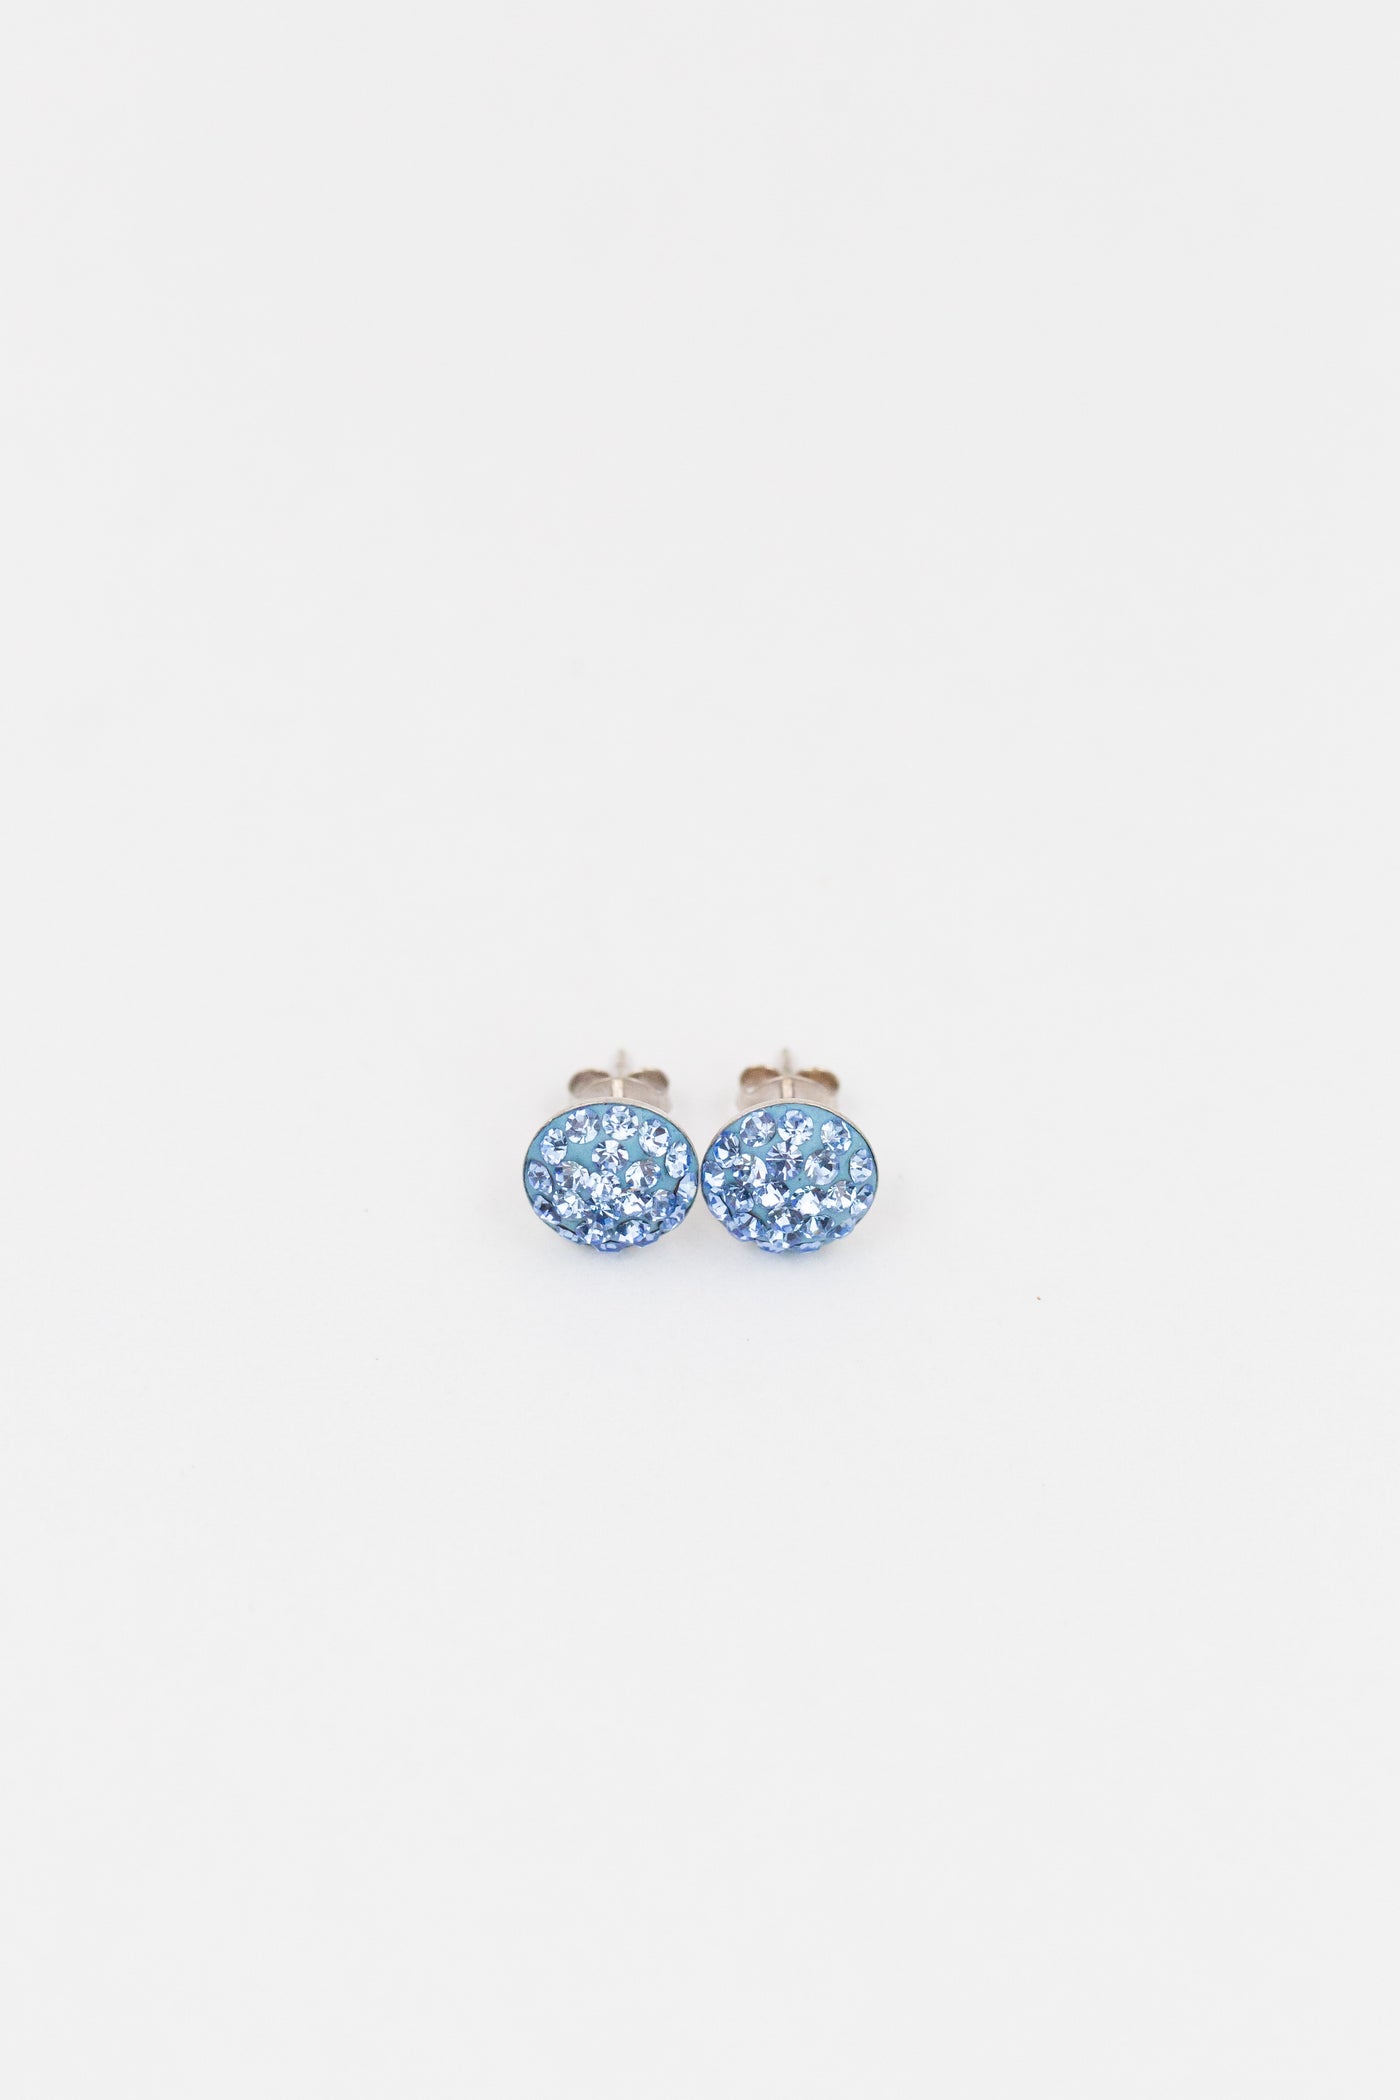 9mm Round Light Sapphire Swarovski Crystal Sterling Silver Earrings | Annie and Sisters | sister stud earrings, for kids, children's jewelry, kid's jewelry, best friend